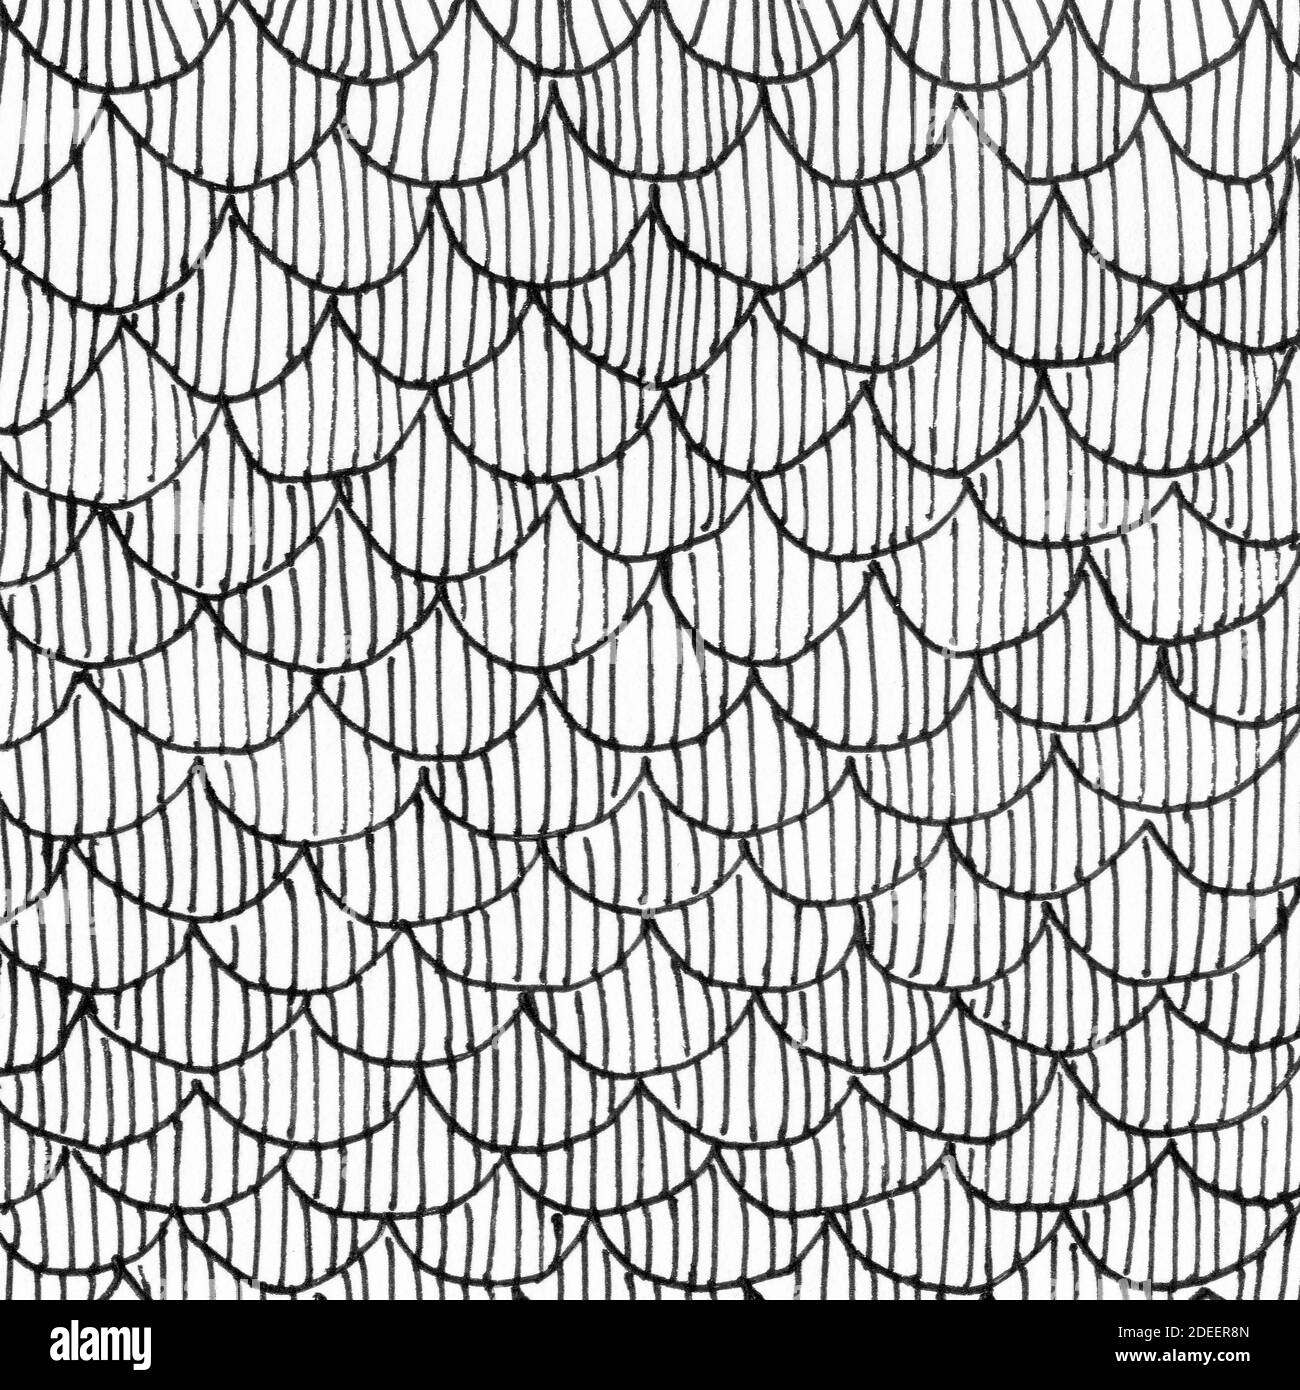 Fish scales ink texture. Abstract black and white hand drawn